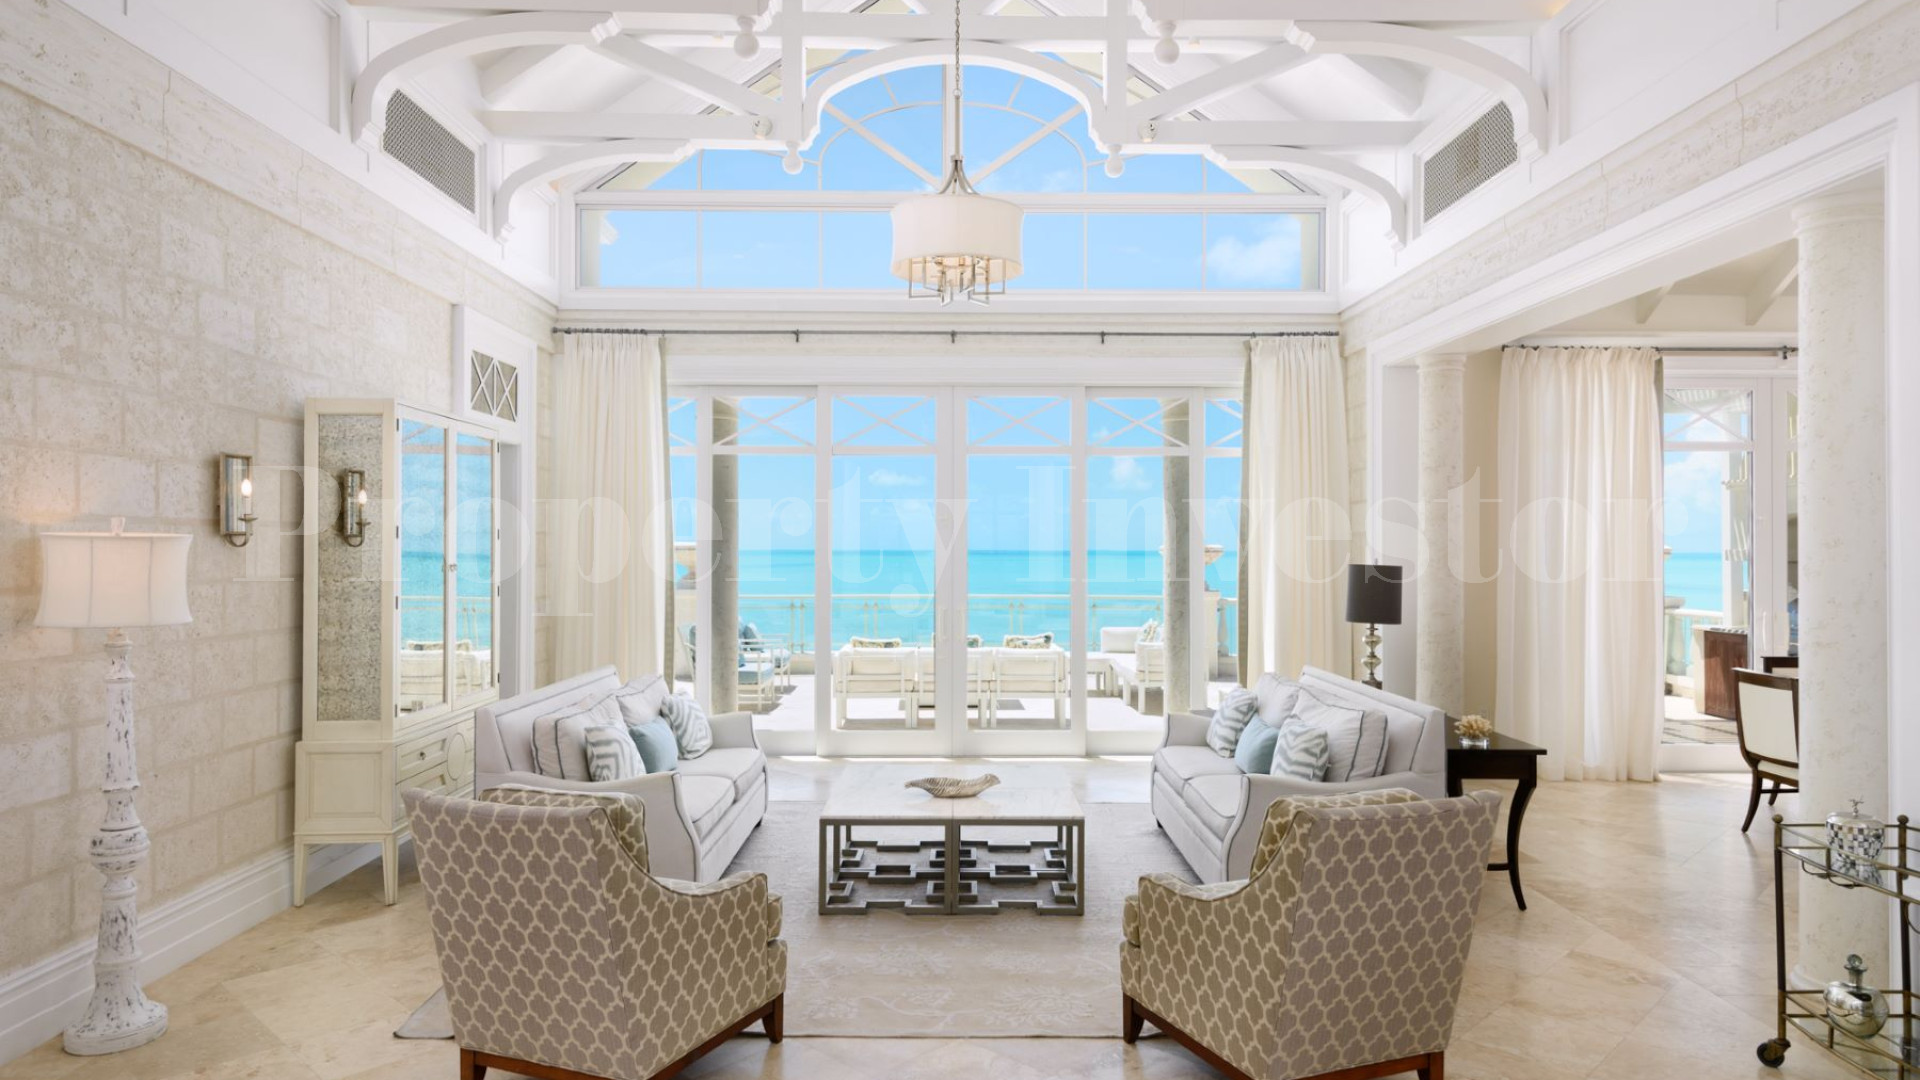 Exclusive 3 Bedroom Luxury Penthouse with Incredible Terrace & Panoramic Views for Sale on Long Bay Beach, Turks & Caicos